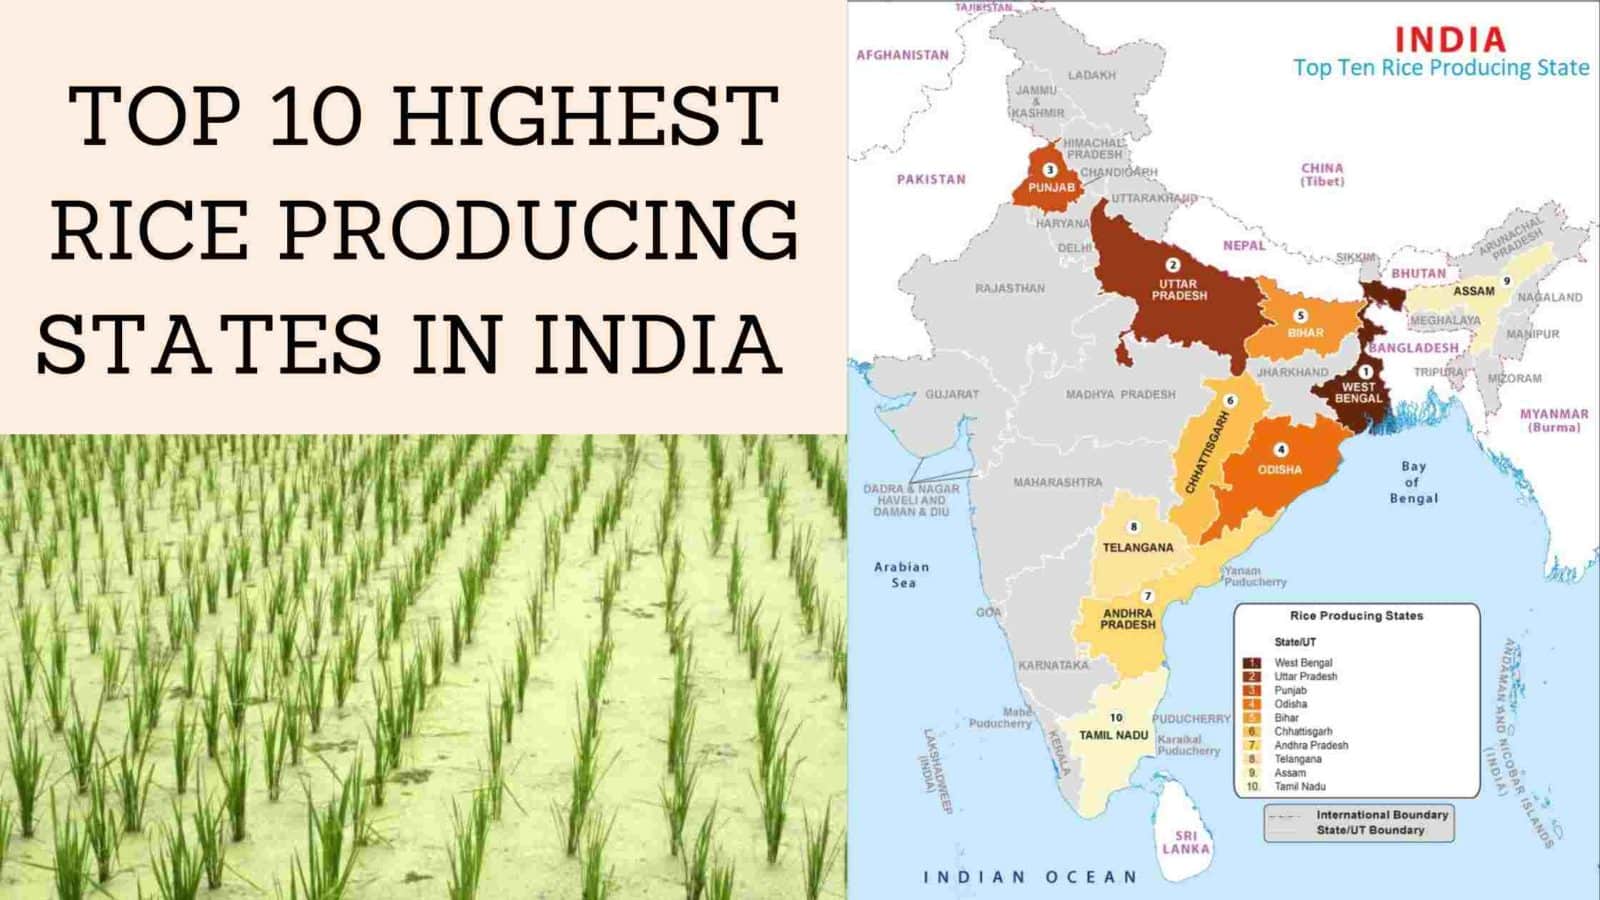 Top 10 highest rice producing state in India